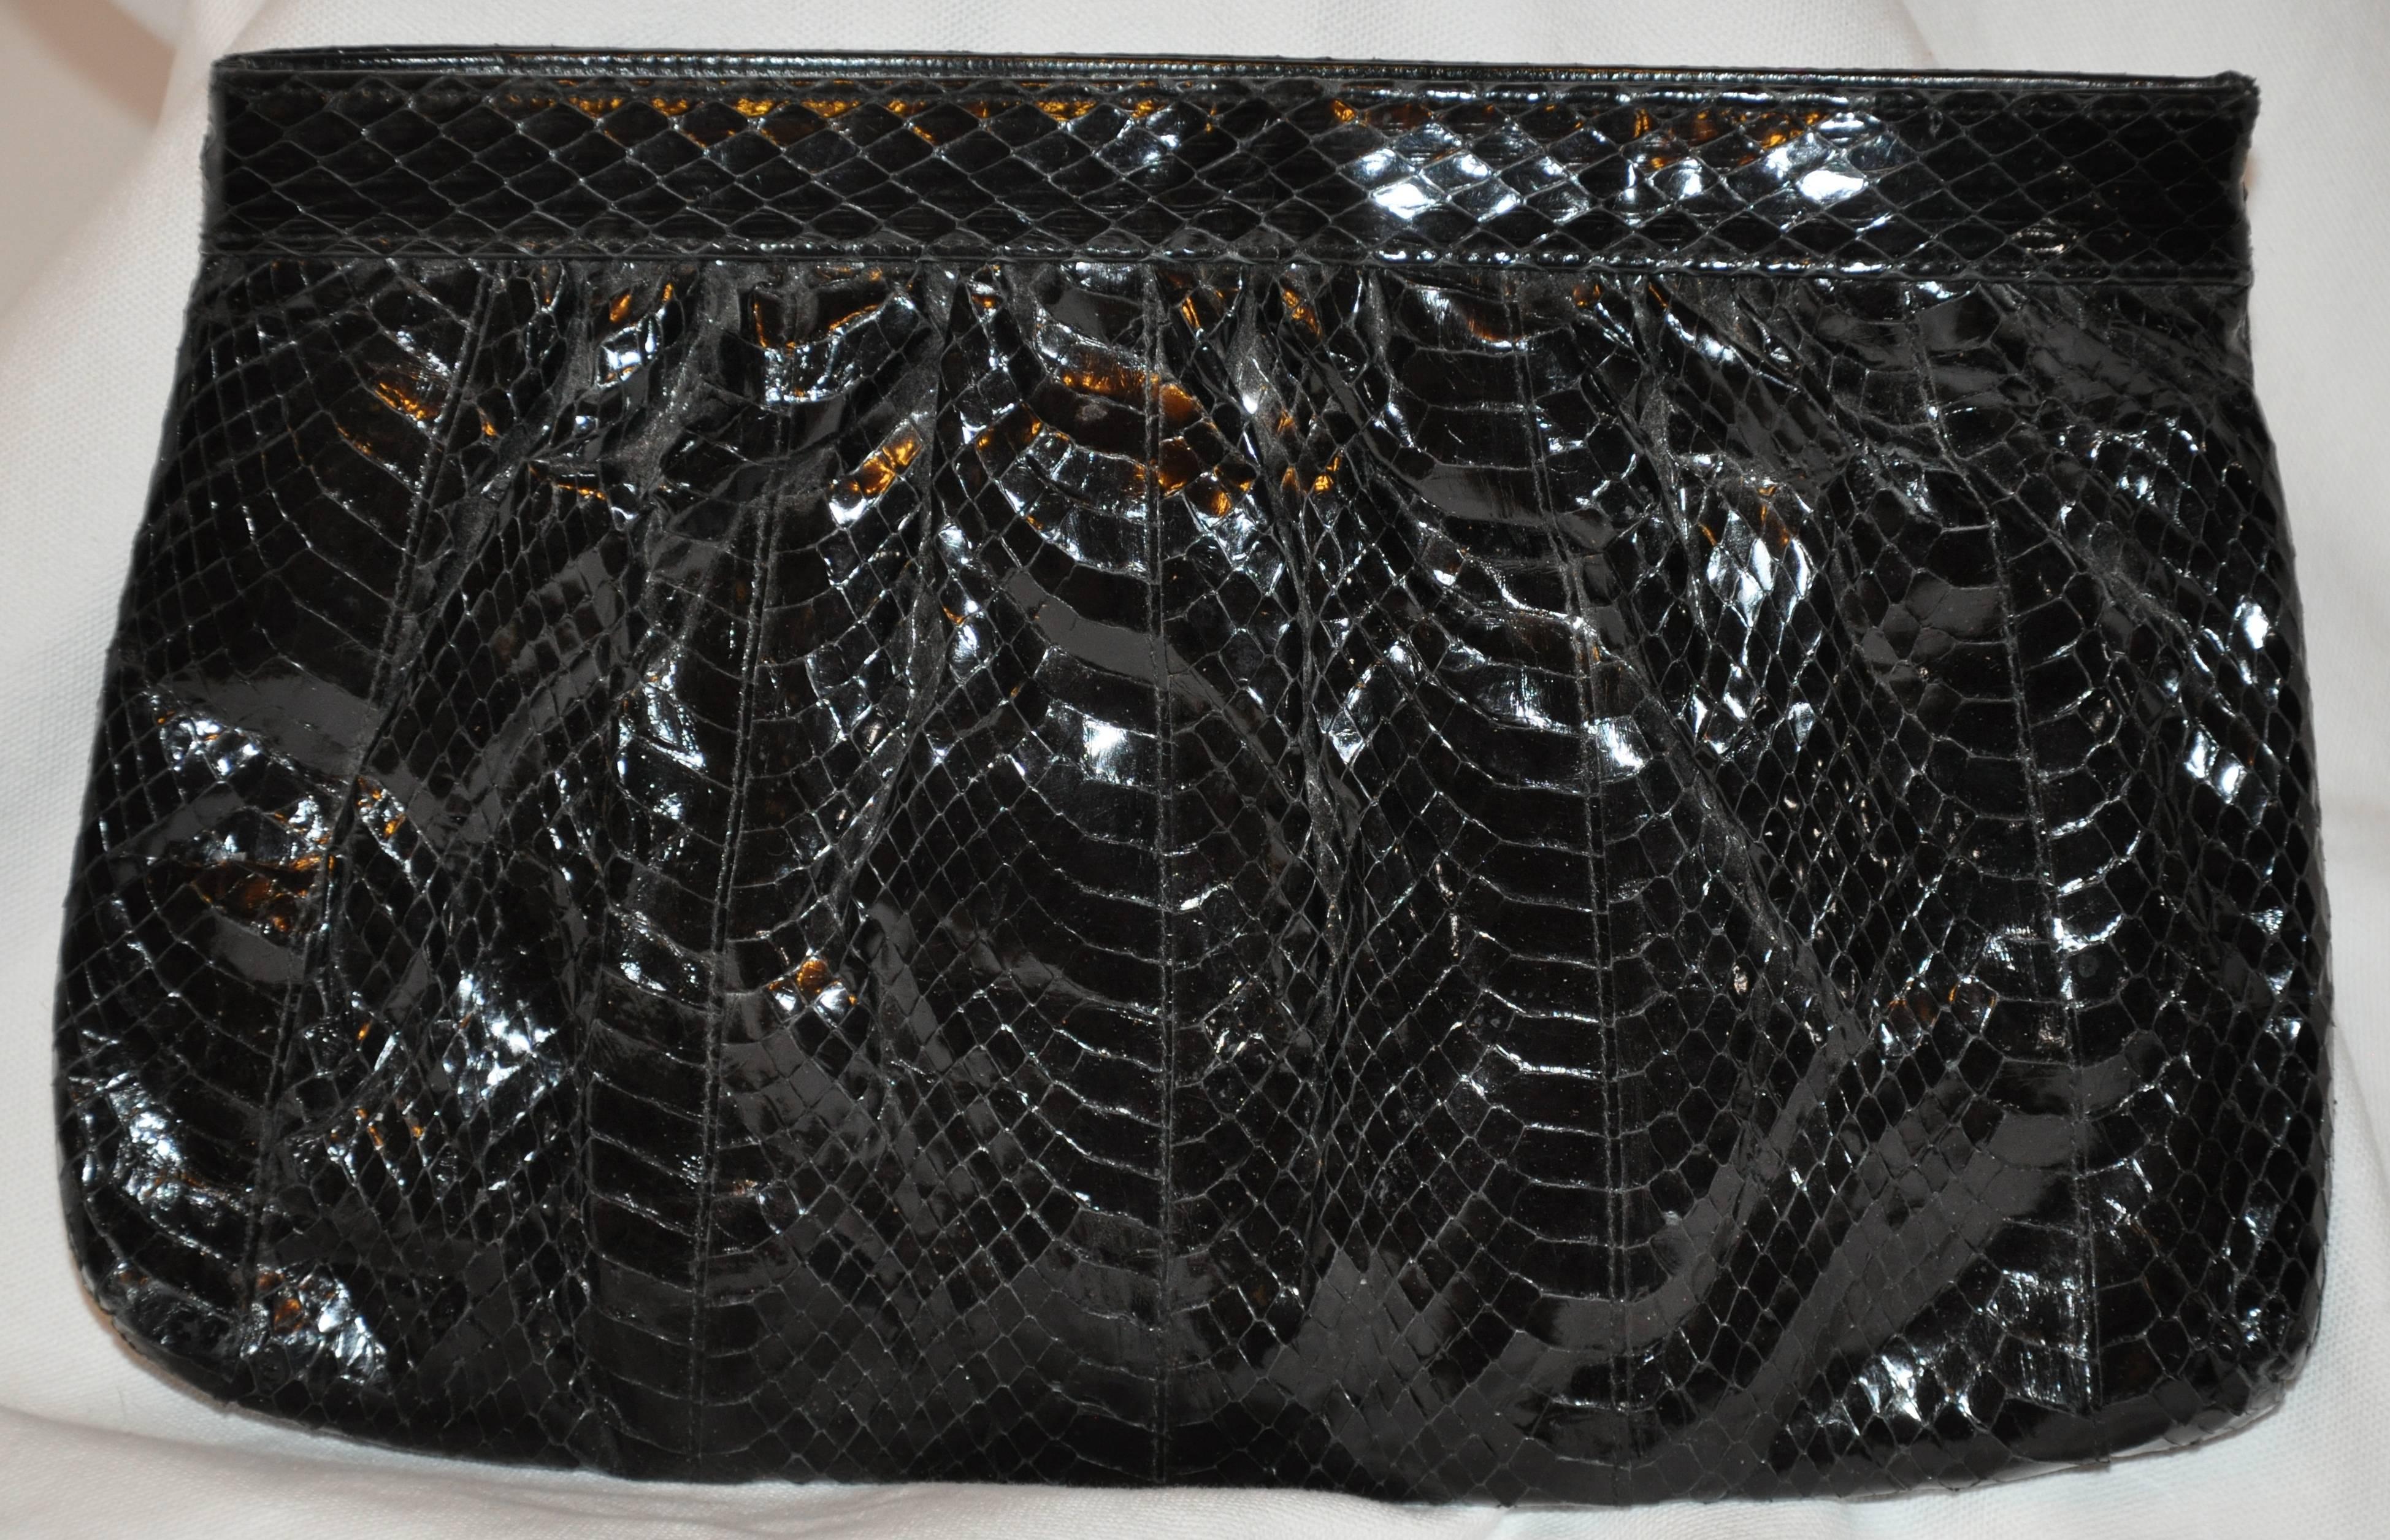        Saks Fifth Avenue elegant polished black snake clutch with optional shoulder straps features a "spring-back" opening as well as a zippered top. The optional calf-skin shoulder strap measures 44 inches in length. The interior has a